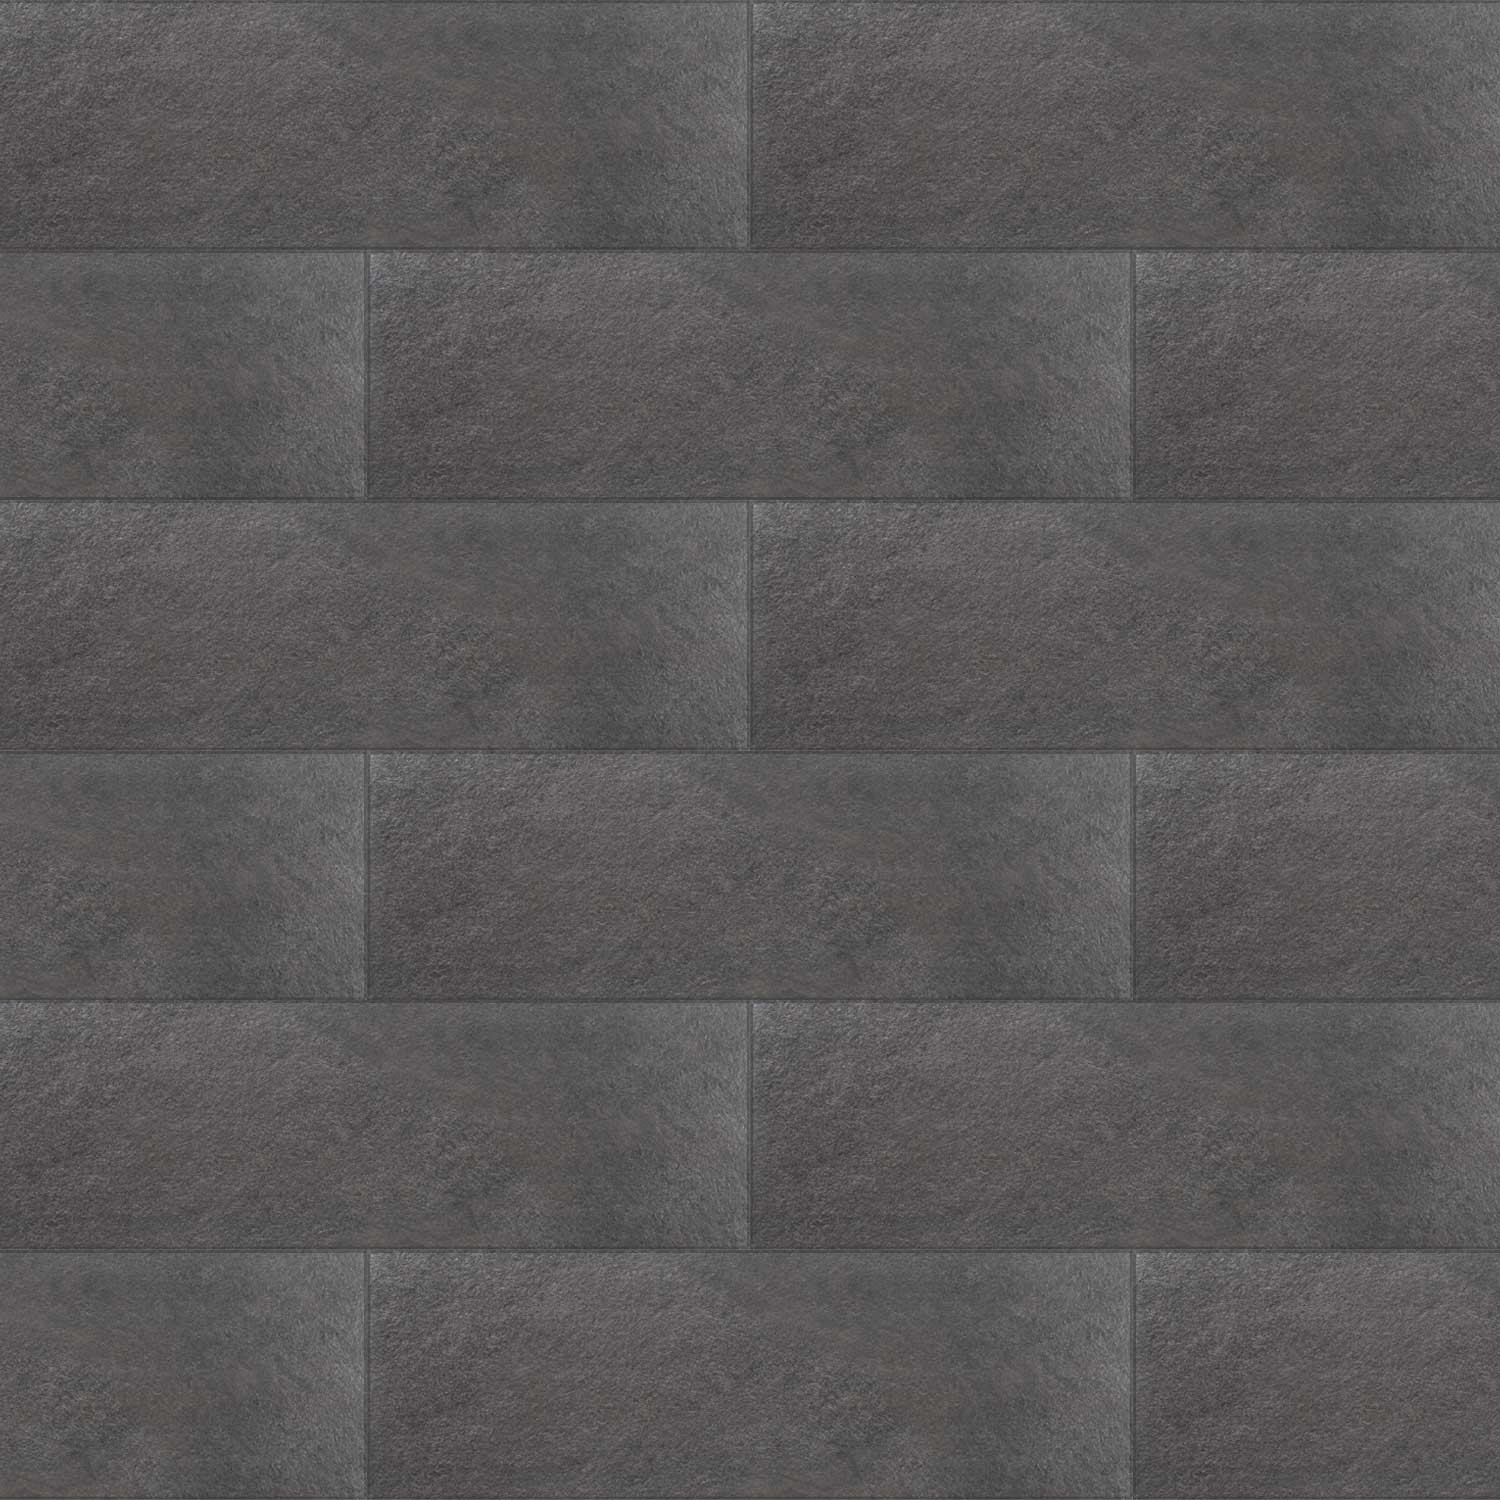 Touchstone Black Ceramic Wall Tile Large Stone Effect 290 x 890mm